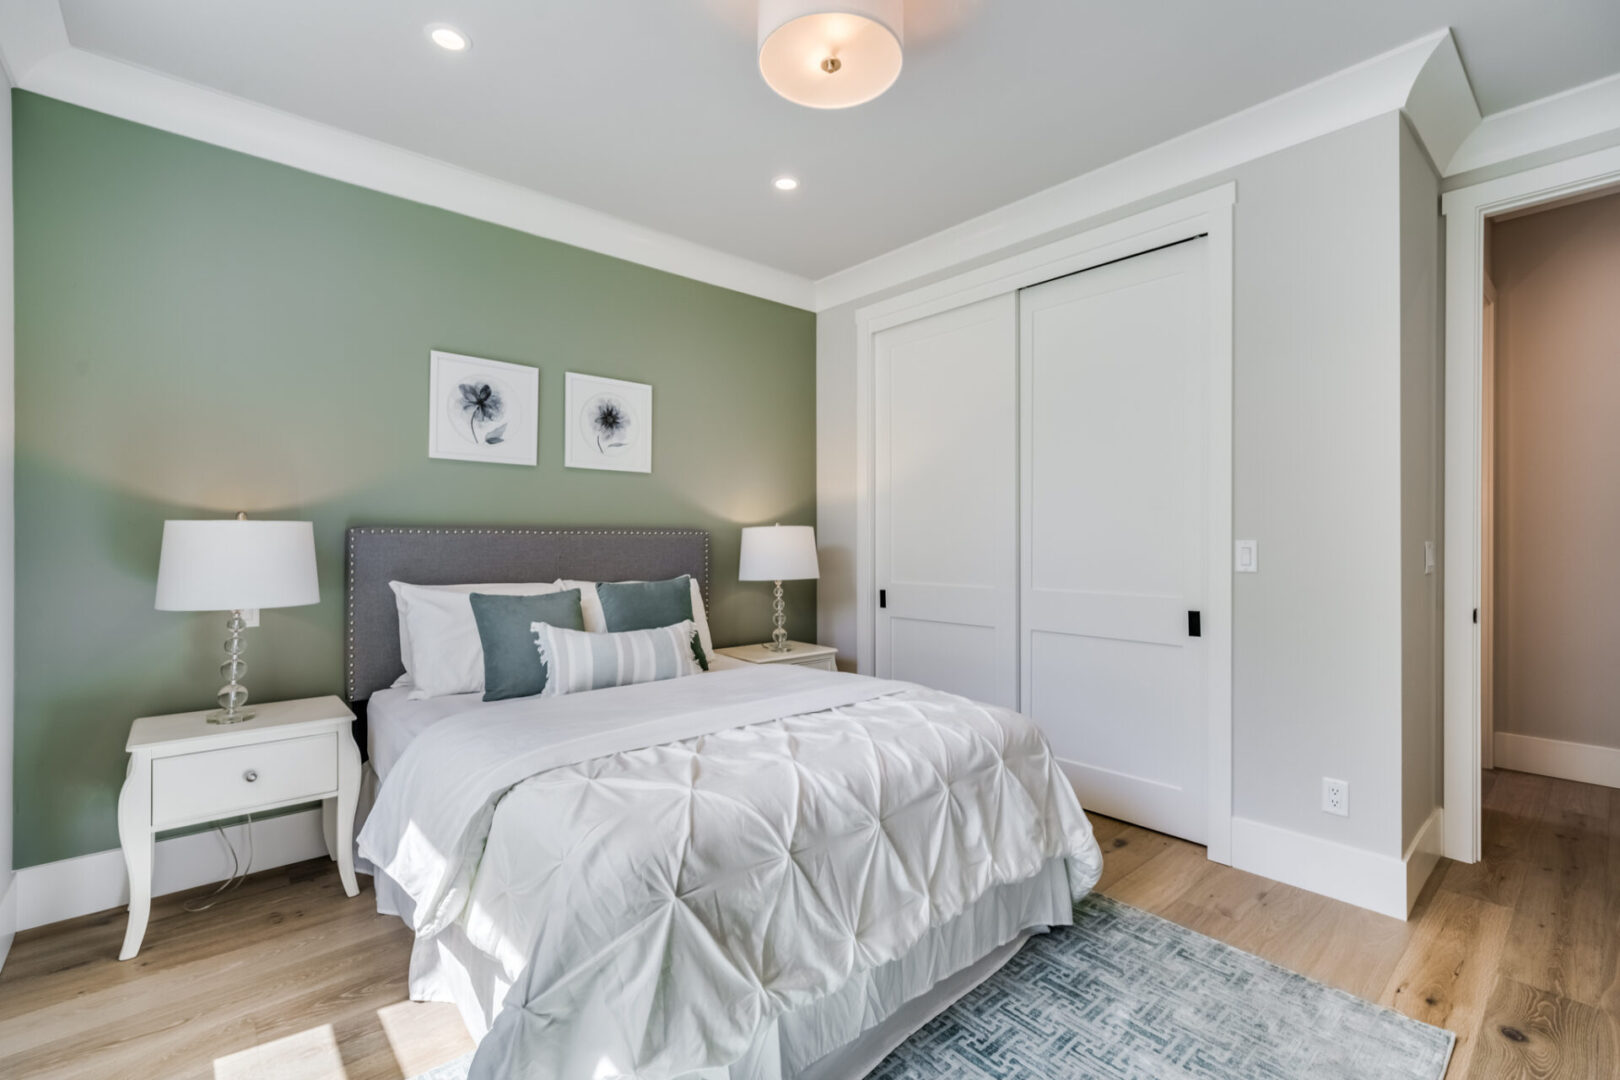 A bedroom with green walls and white bedding.